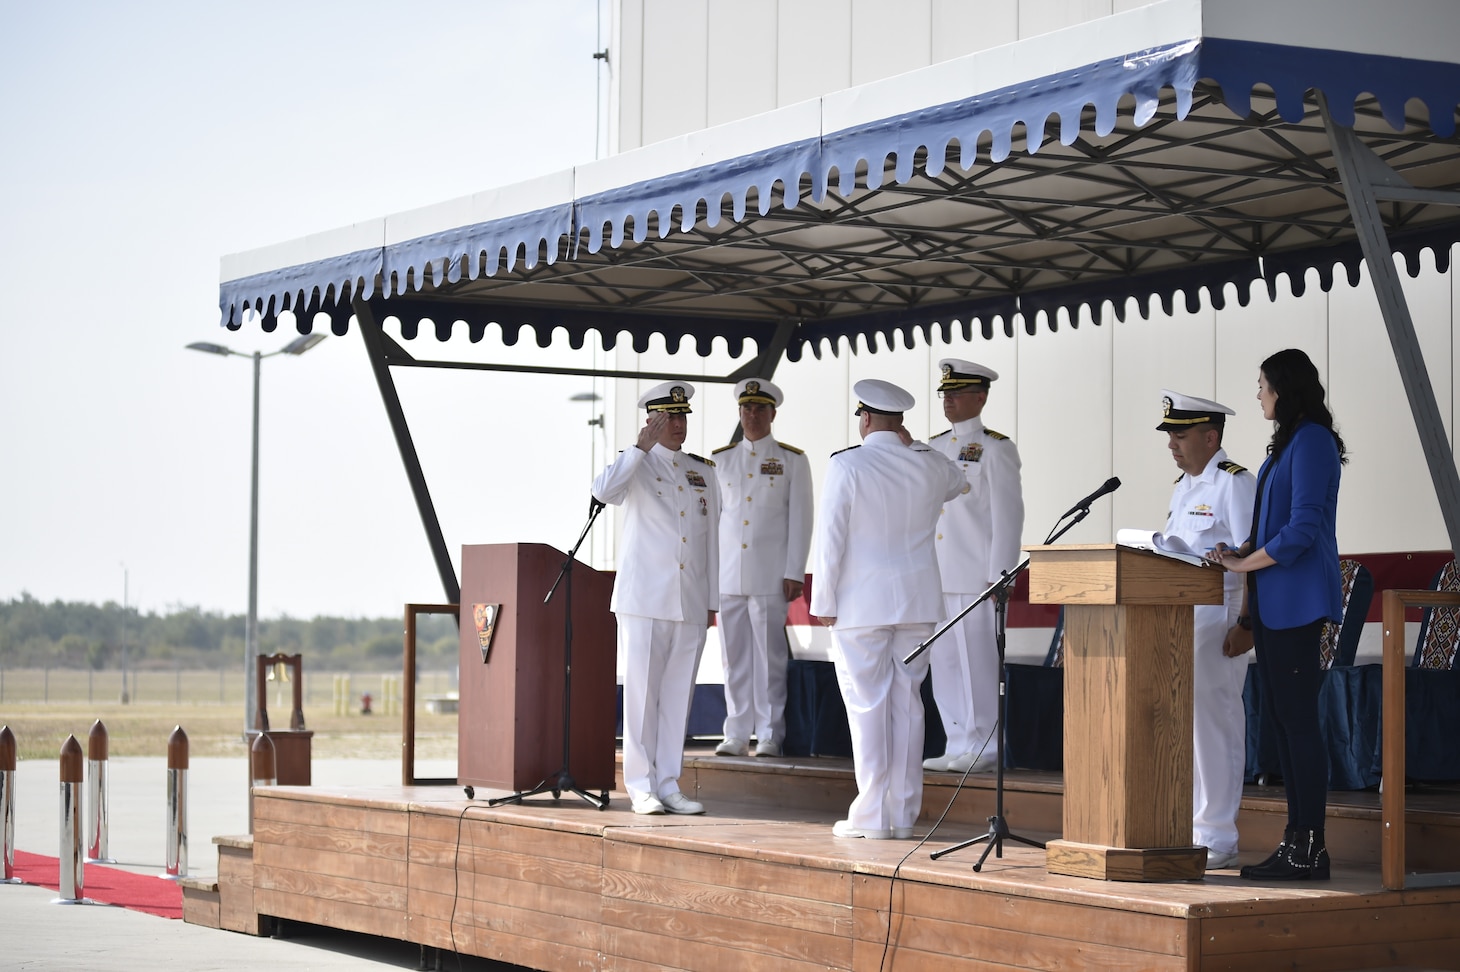 Cmdr. Michael Dwan, left, salutes Cmdr. Frederick Hettling, center, signifying that Cmdr. Hettling has assumed command as Commander, U.S. Aegis Ashore Missile Defense System Romania (USAAMDSRO), at a change of command ceremony onboard Naval Support Facility Devesulu, Romania, Sept. 17.